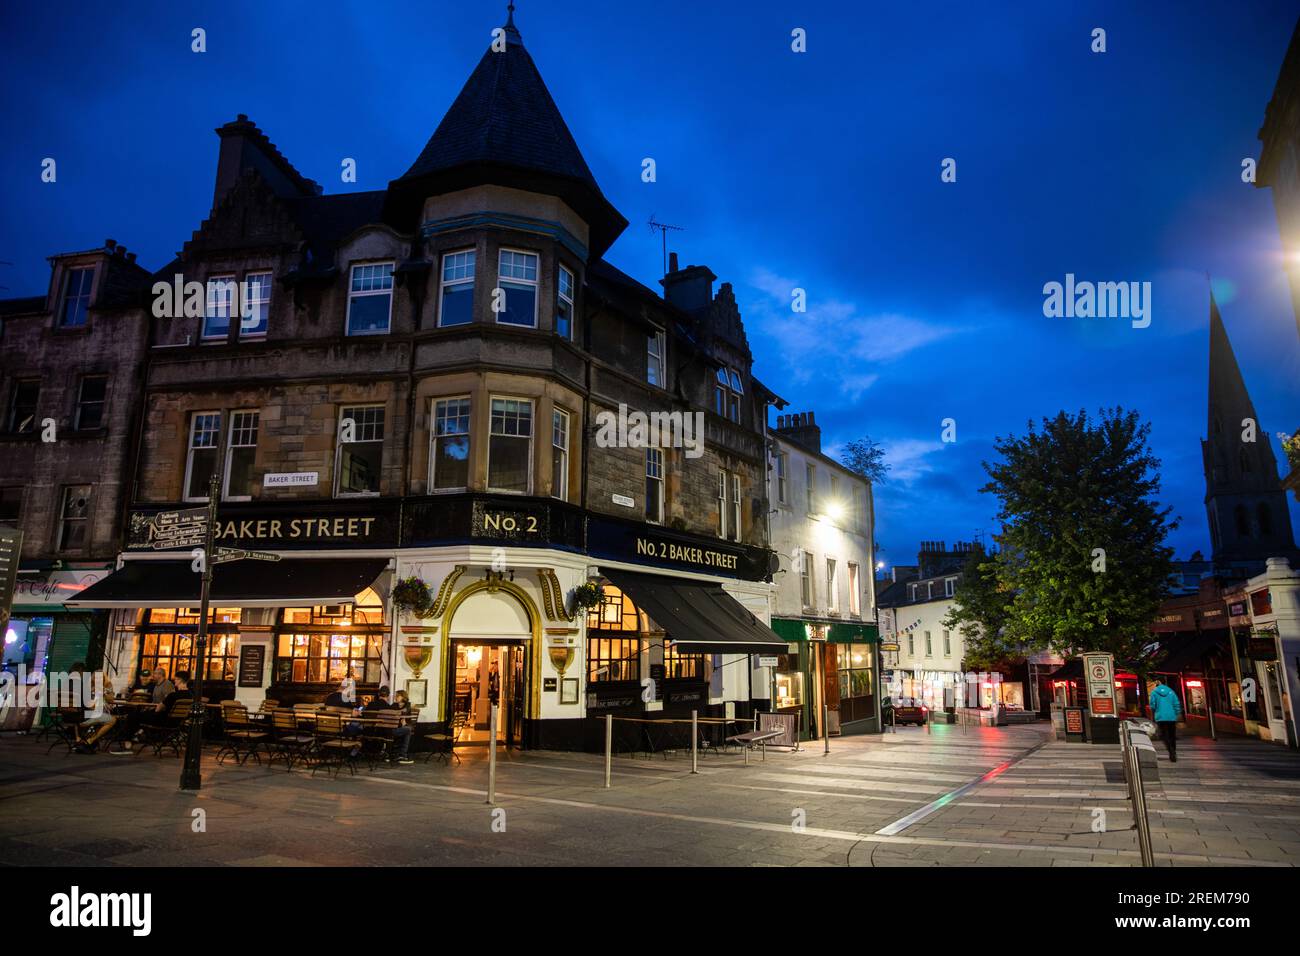 No 2 Baker Street a pub in Stirling on a summers evening in Scotland's central belt. Stock Photo